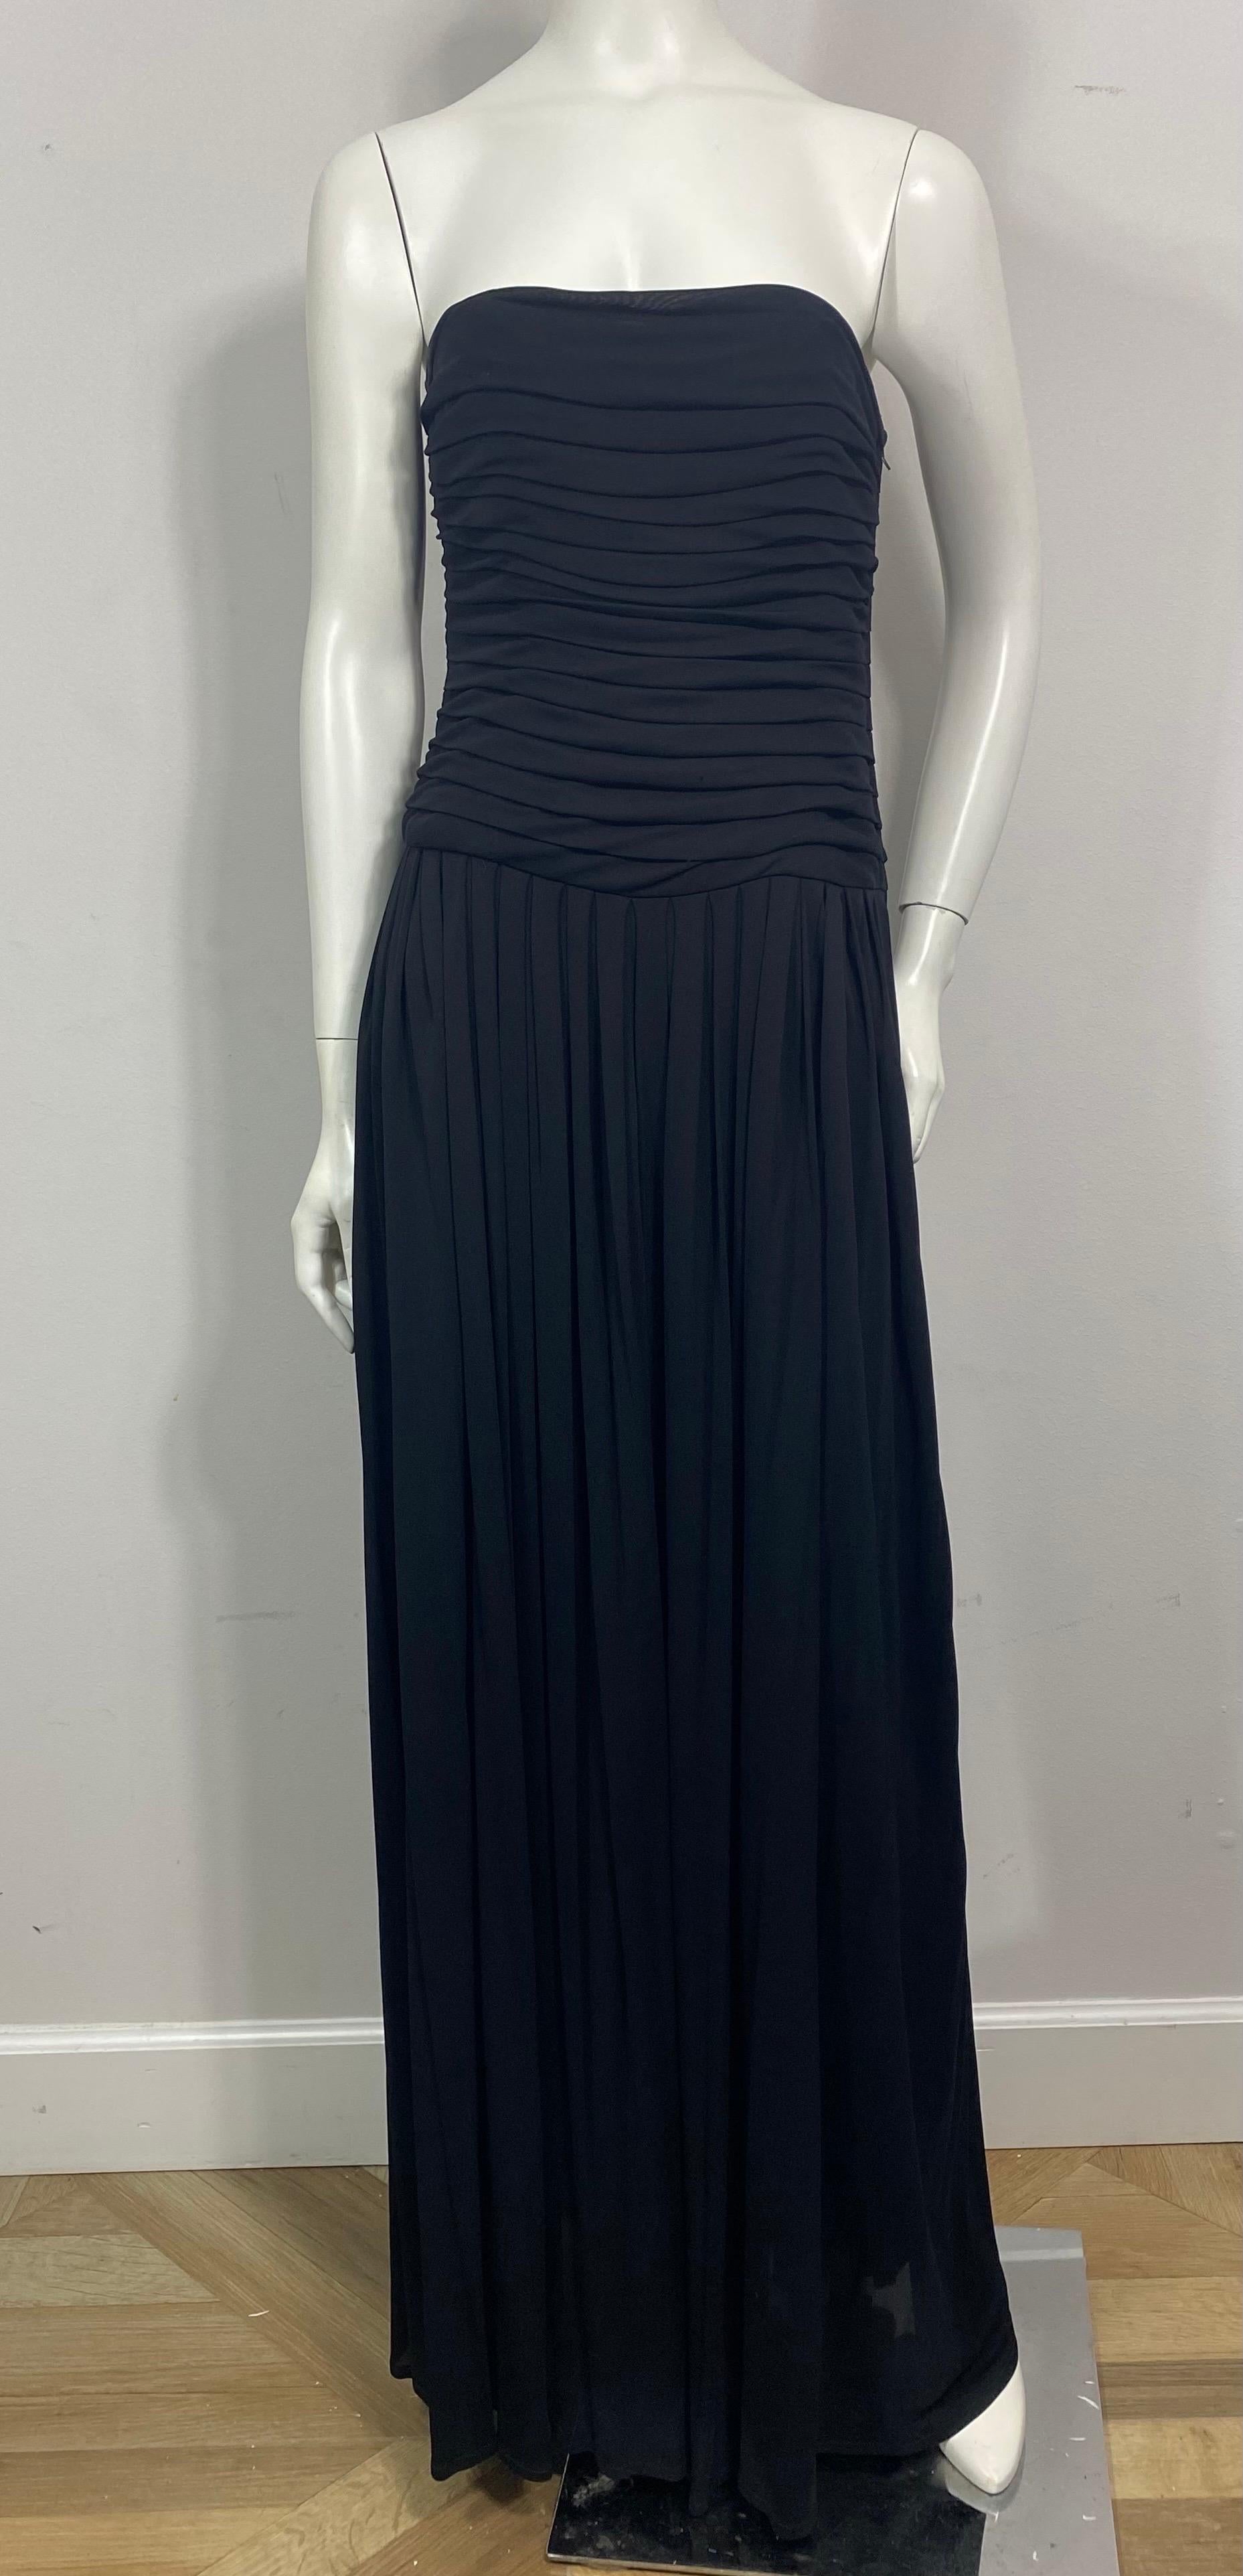 Lanvin 1970’s Black Shutter Pleat Matte Jersey Strapless Long Dress-Size 40. This simple yet elegant Lanvin creation is from the 1970’s and is in good vintage condition. The long dress is made of a black matte jersey fabric, the strapless lined